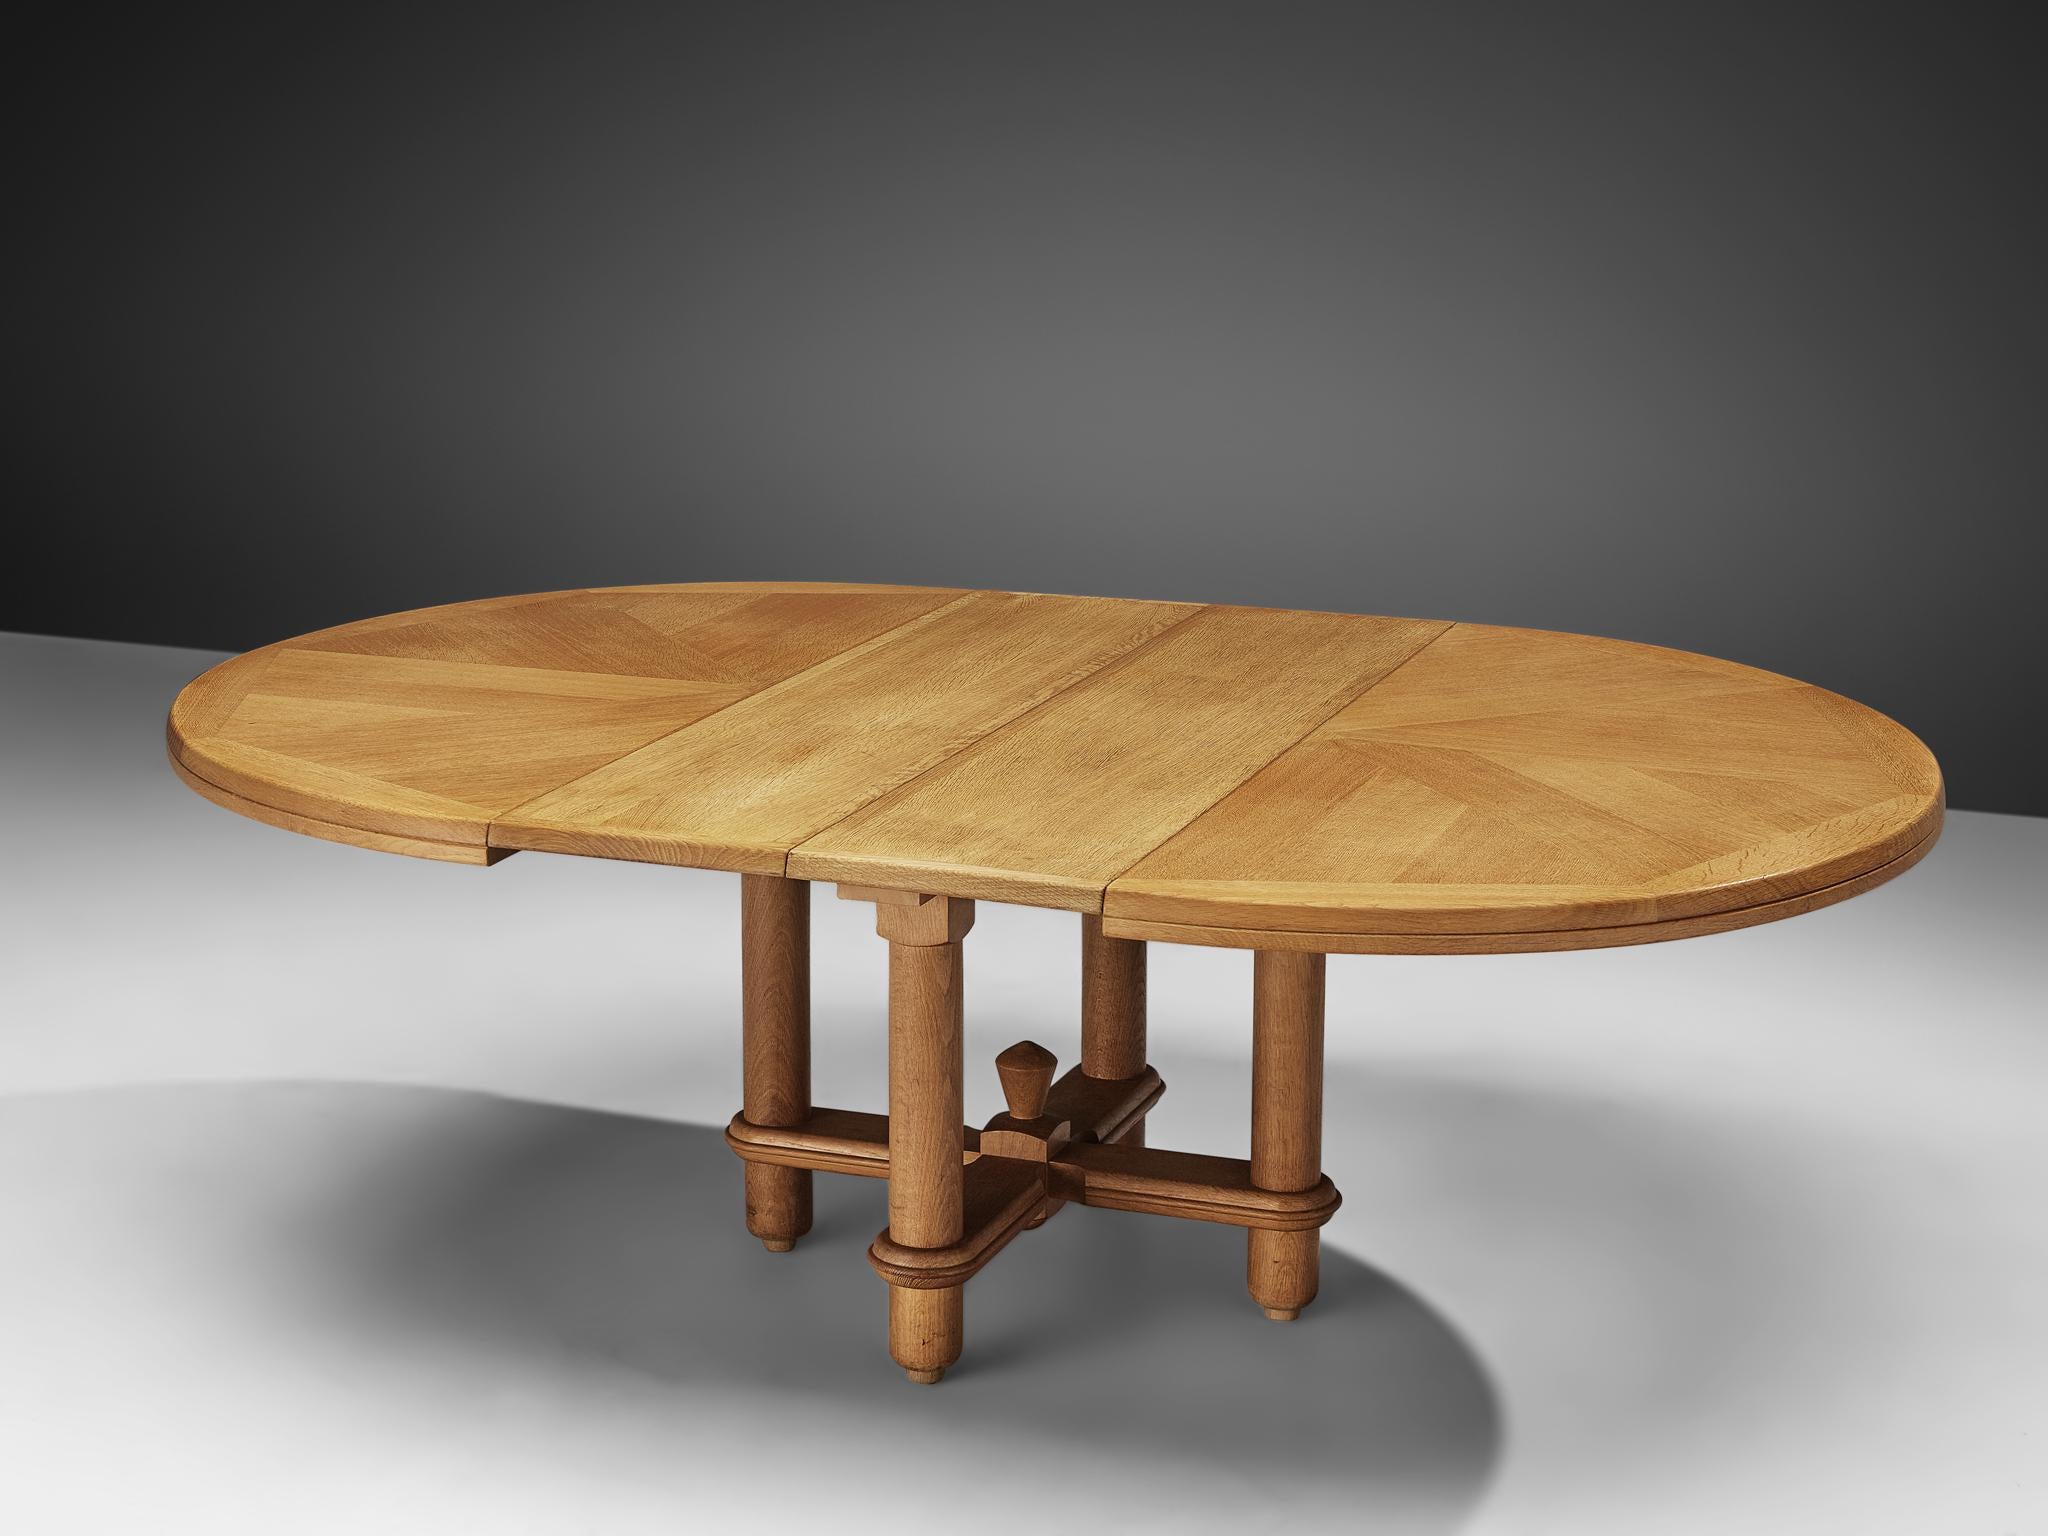 Guillerme et Chambron, extendable dining table, oak, 1960s.

Round shaped dining table with inlayed top. This extendable table in solid oak comes with two optional leaves, which makes it a very versatile item. The sculptural four legged base has